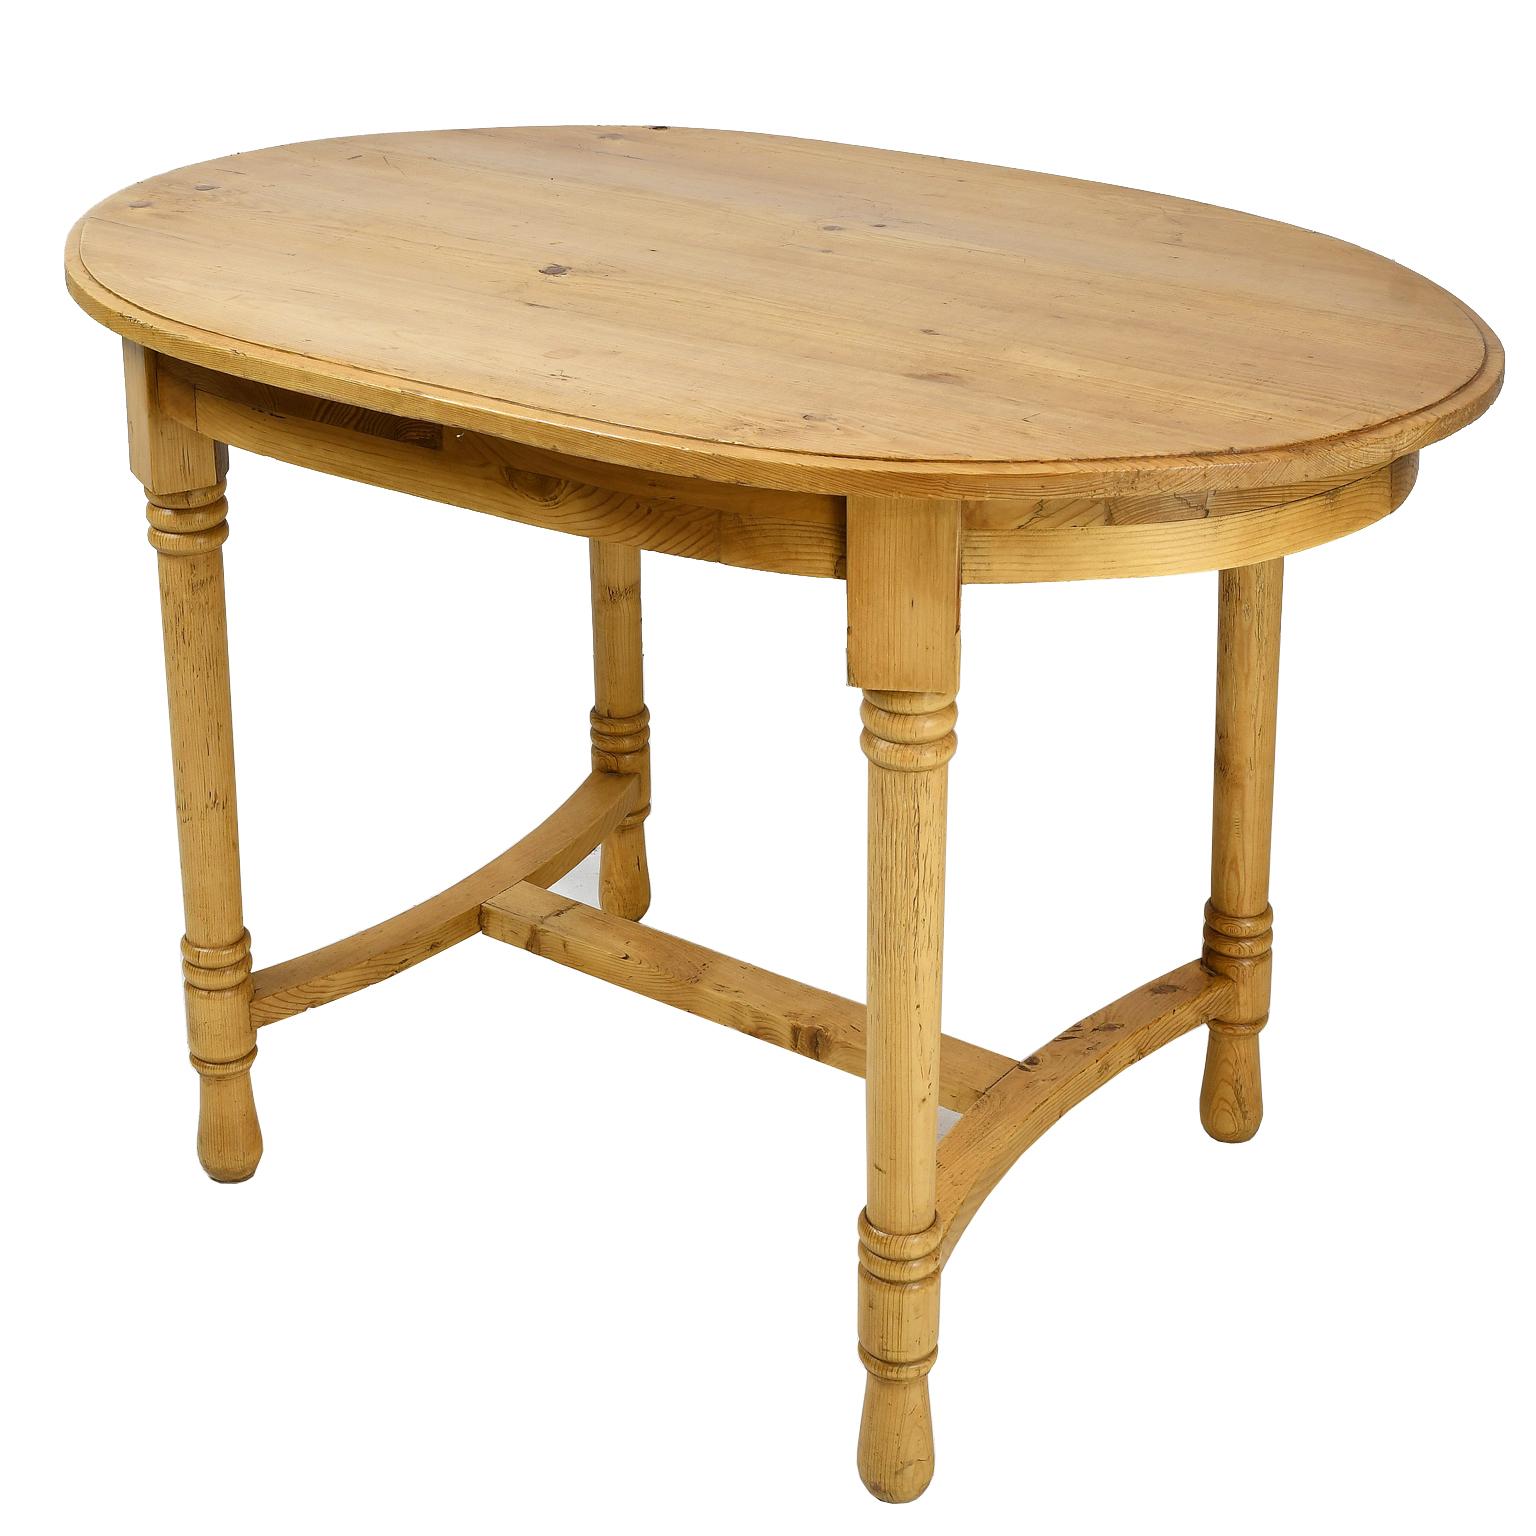 A Danish or North German oval table in scrubbed pine with a traditional wax finish that showcases the light honey-color of the wood. Oval top rests on an apron over four turned legs with 